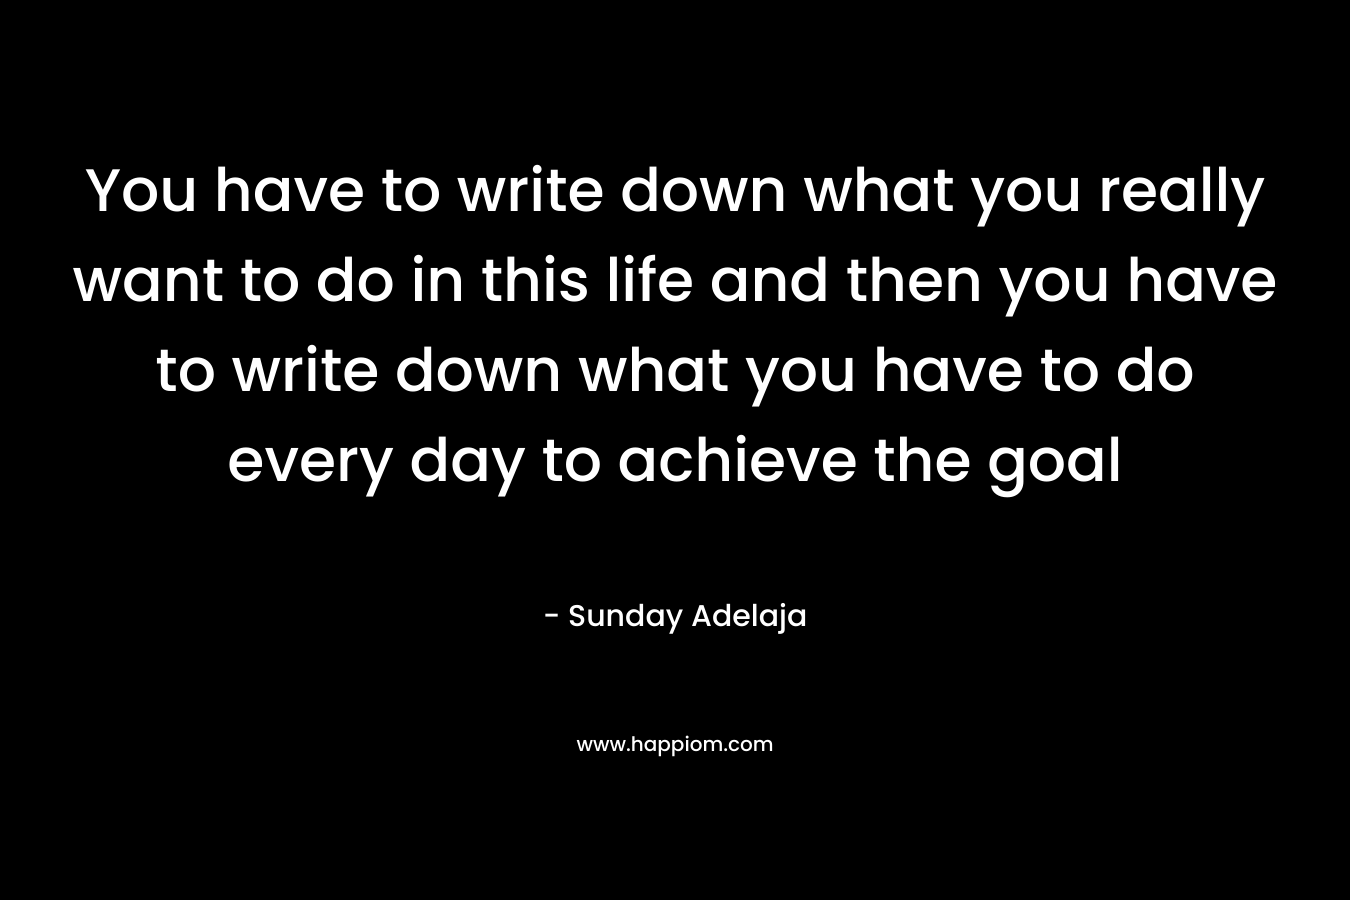 You have to write down what you really want to do in this life and then you have to write down what you have to do every day to achieve the goal